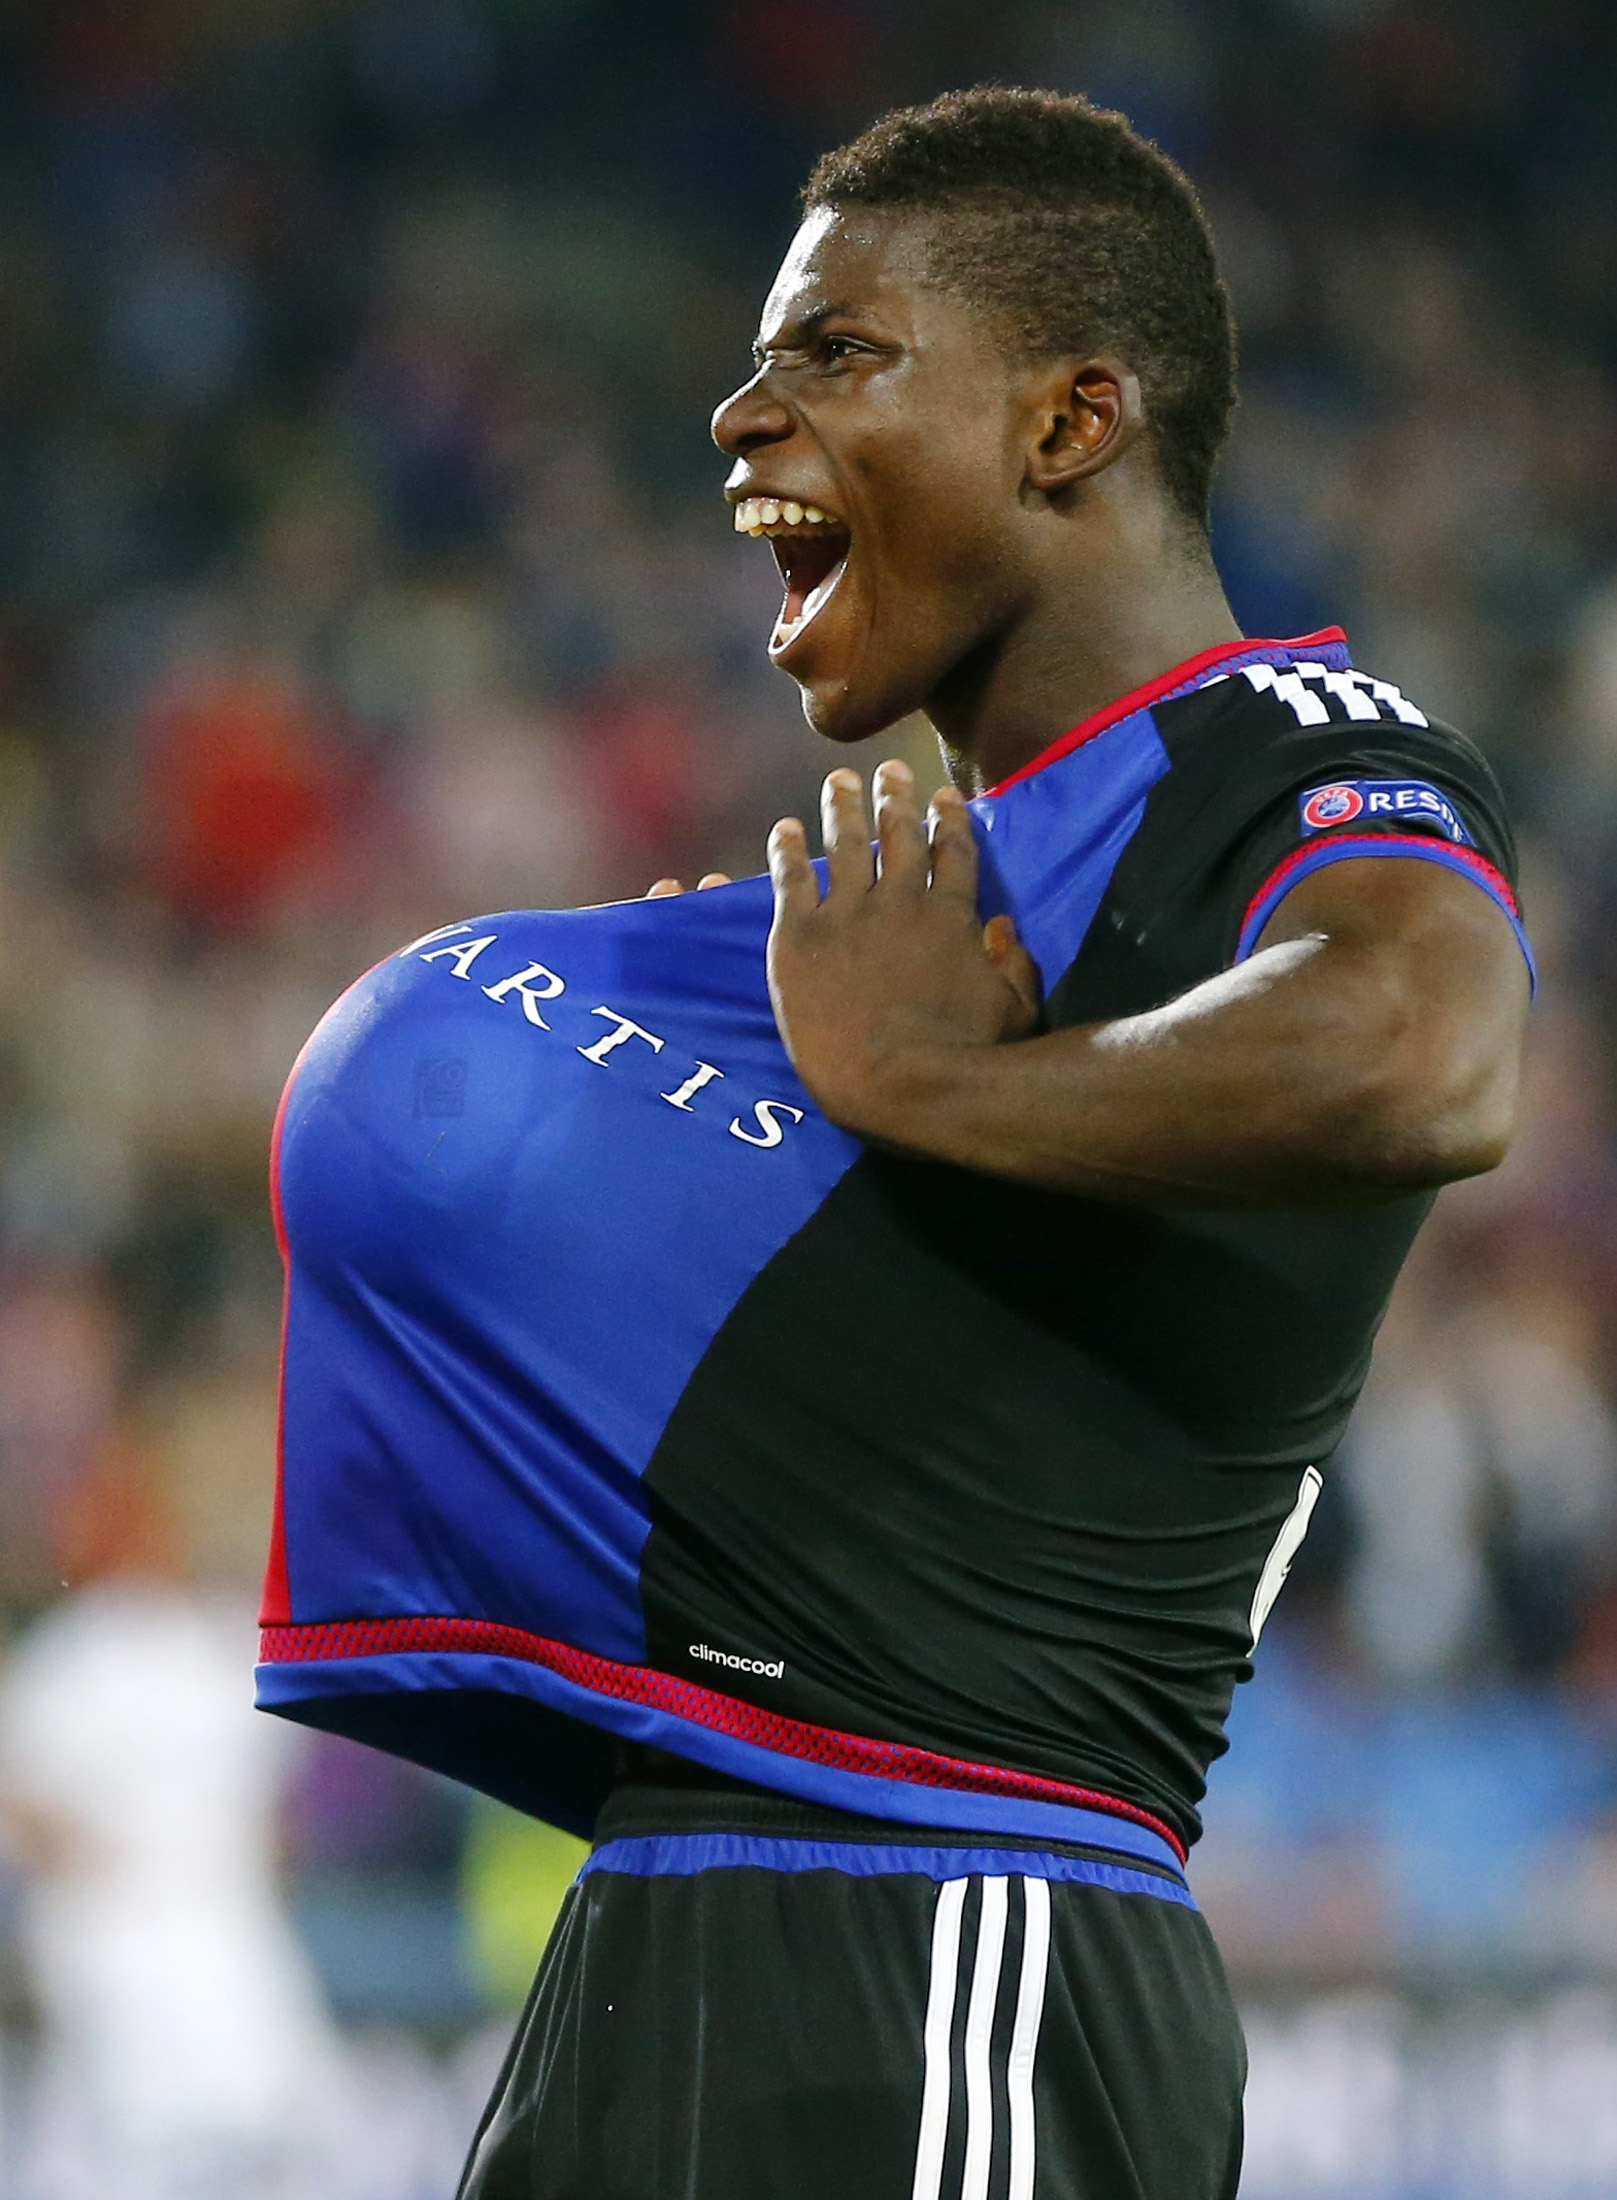 FC Basel's Breel Embolo reacts after scoring the second goal against Maccabi Tel Aviv during their Champions League play-off first leg soccer match at the St. Jakob Park stadium in Basel August 19, 2015. REUTERS/Arnd Wiegmann